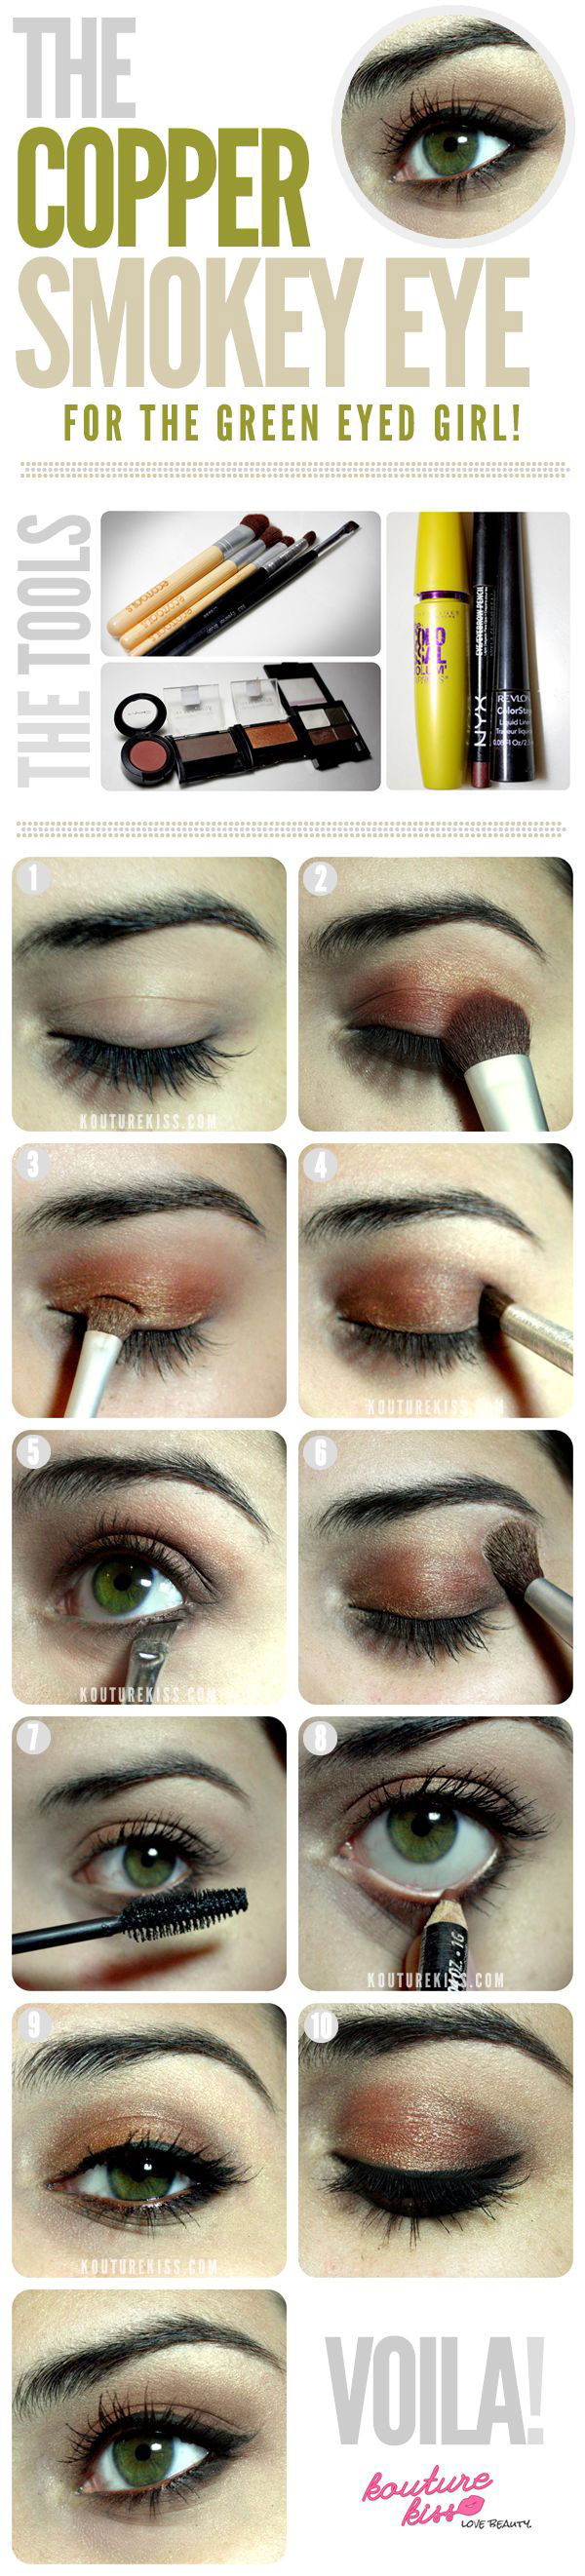 How To Apply Eye Makeup For Green Eyes 25 Prom Makeup Ideas Step Step Makeup Tutorials 2018 Styles